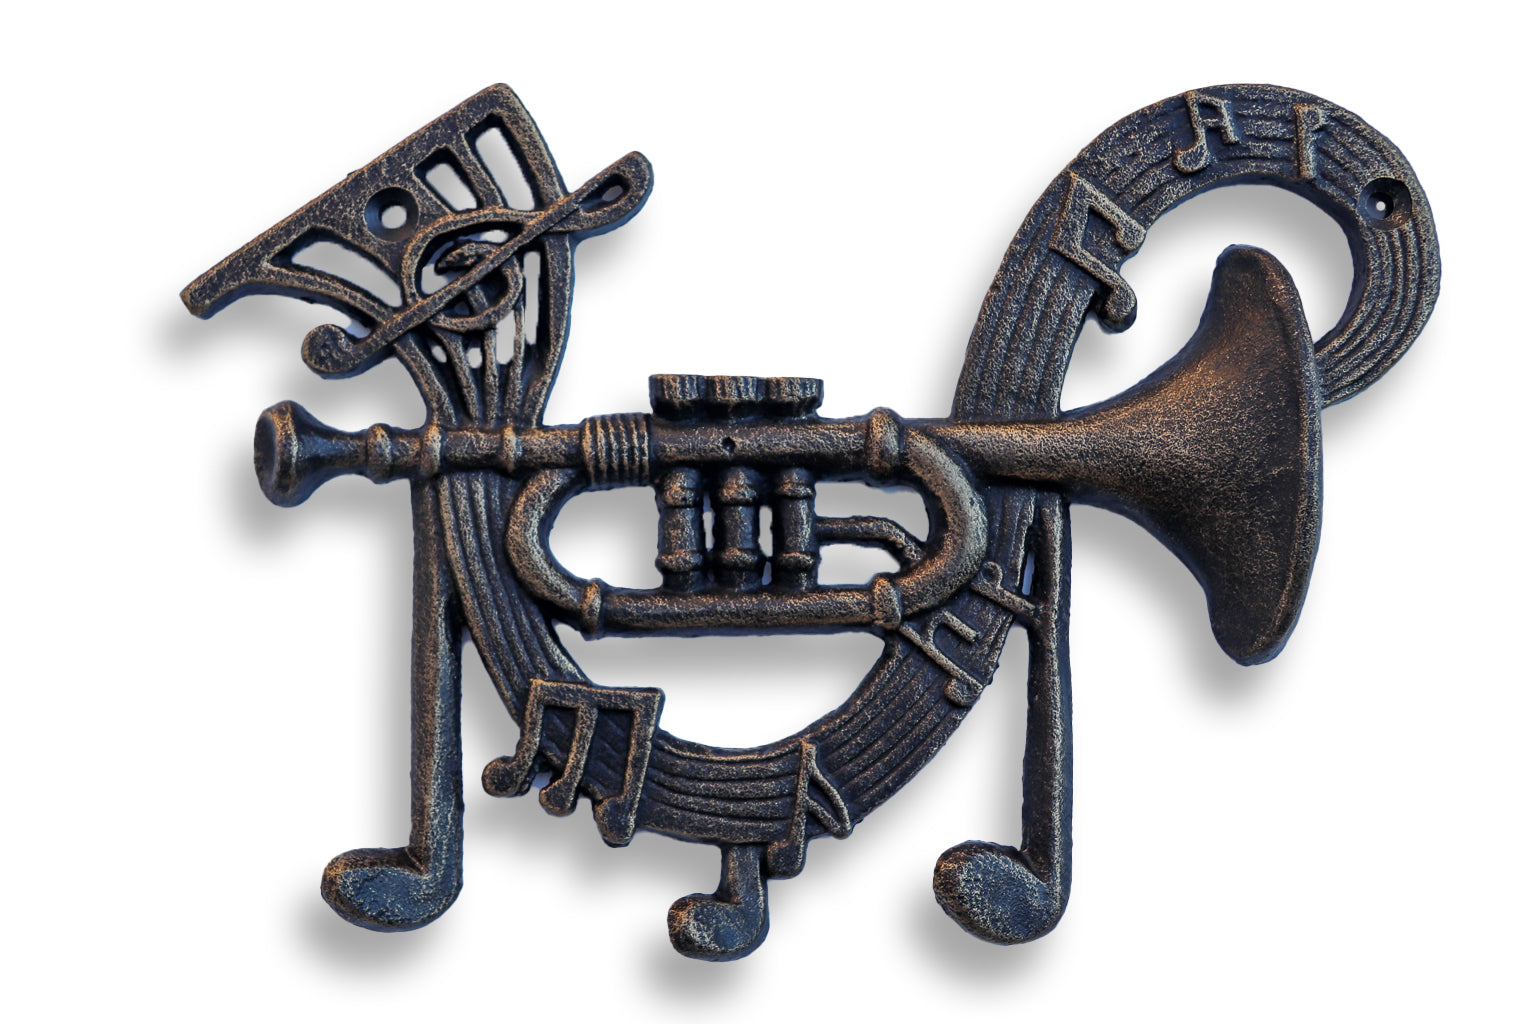 Rustic Deco Jazz Trumpet Playing Musical Notes Wall Hanger - Cast Iron Metal Hooks